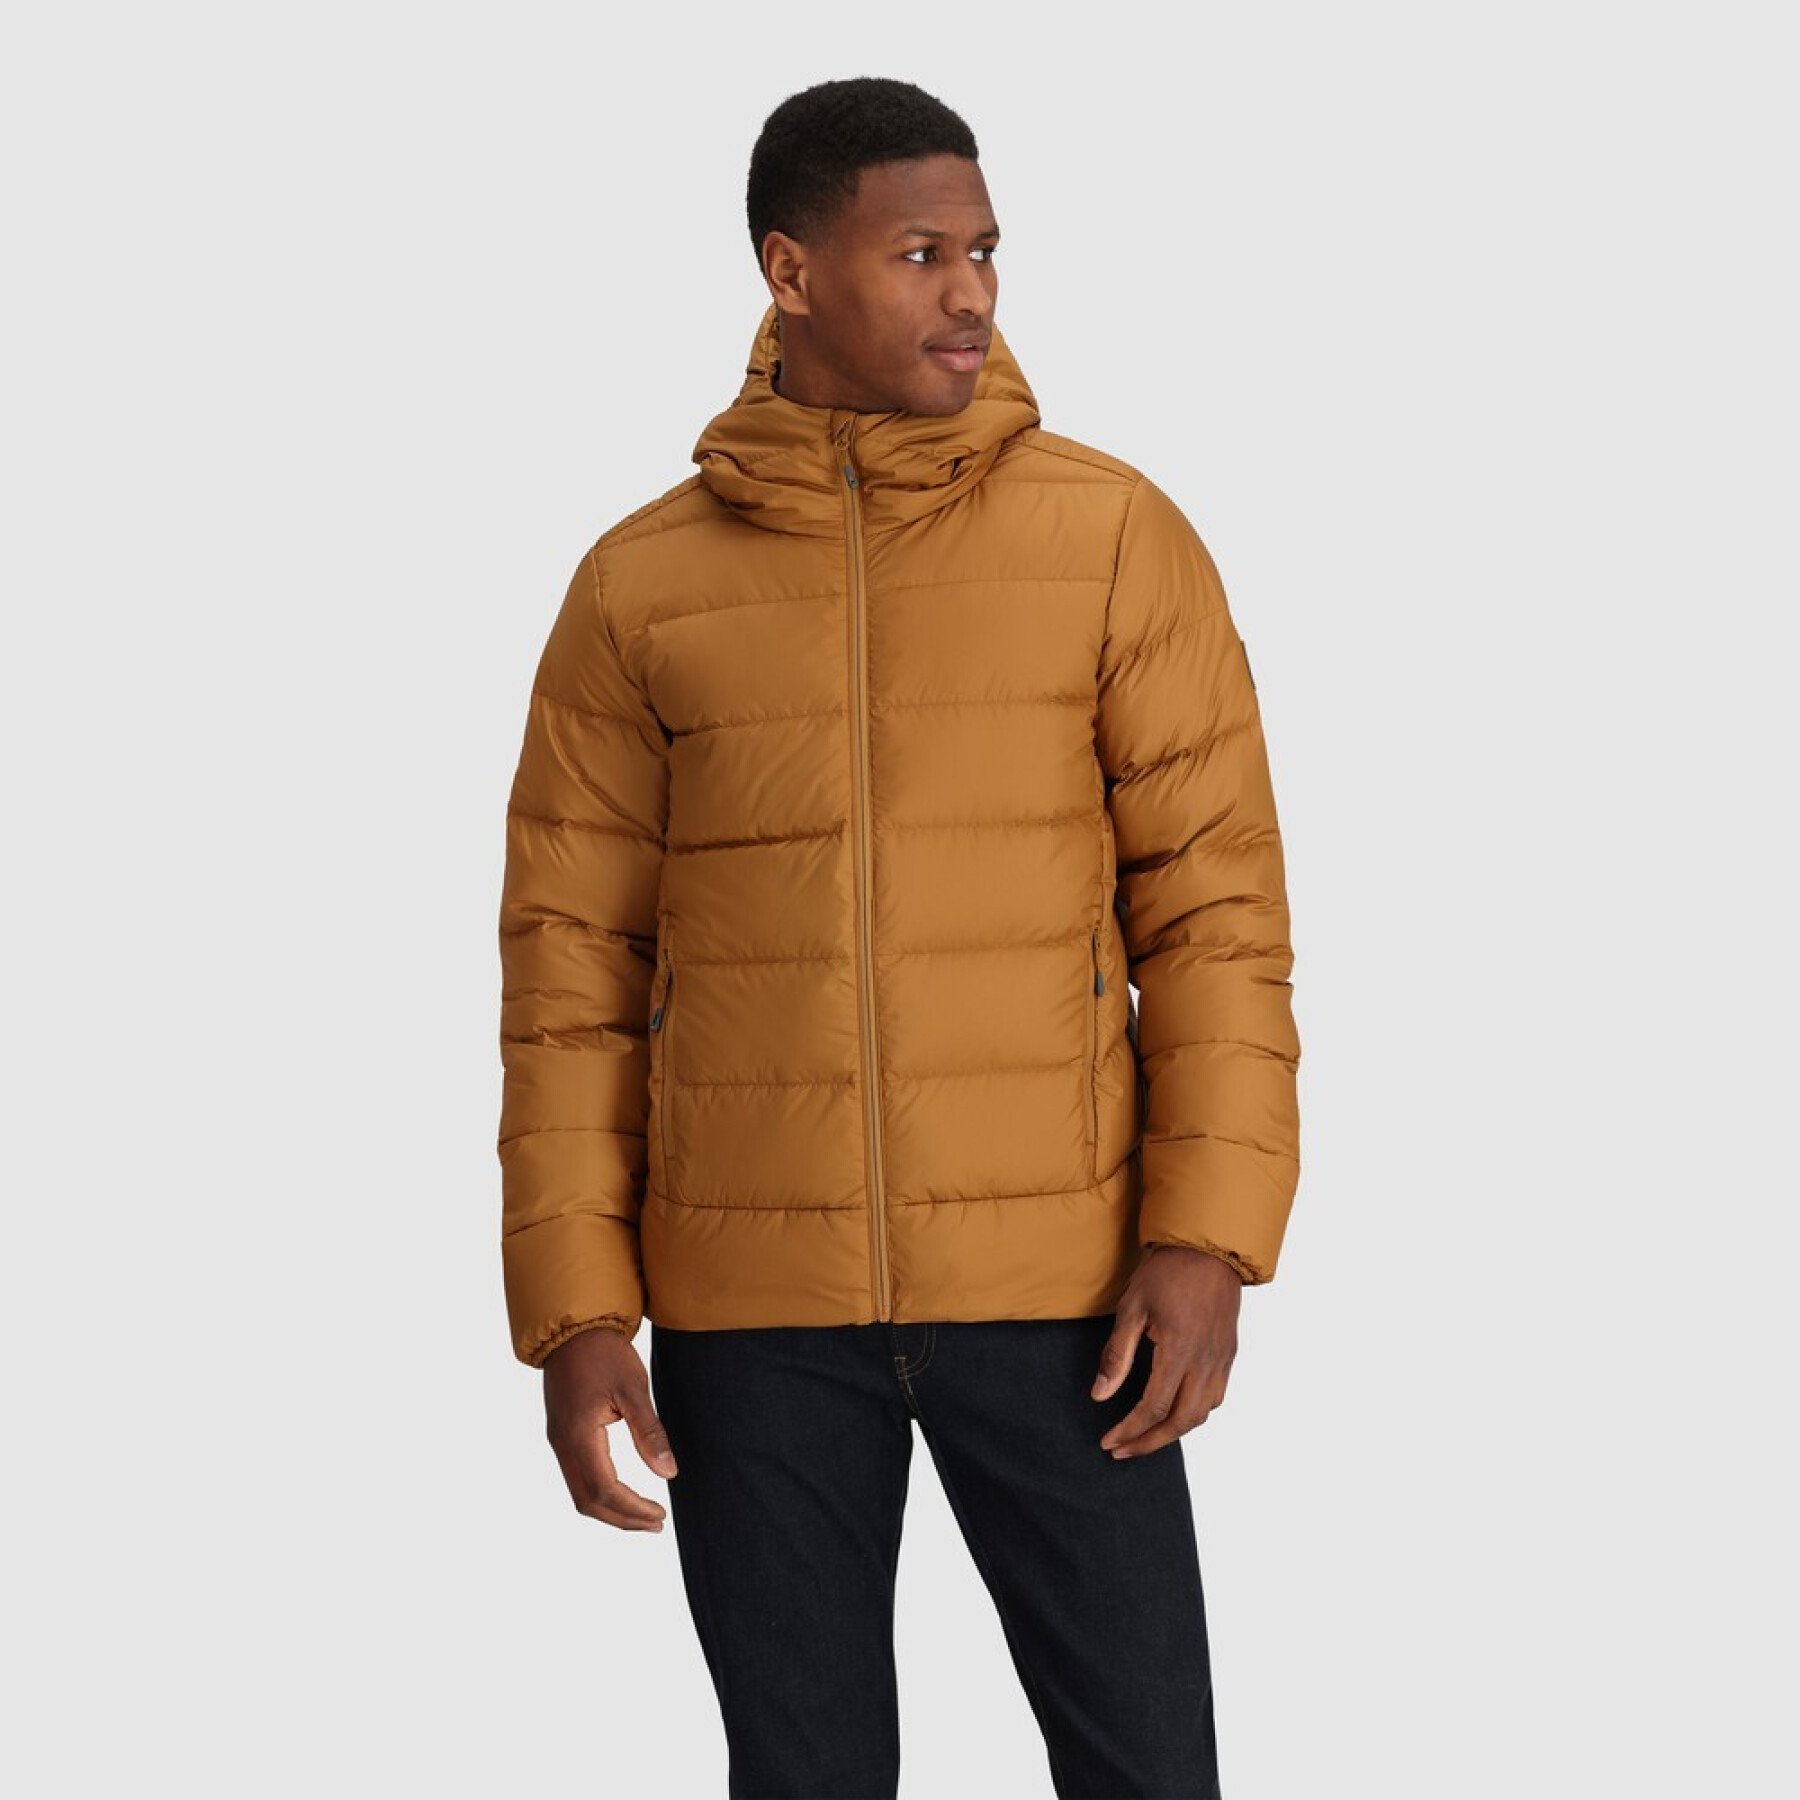 Down jacket Outdoor Research Coldfront